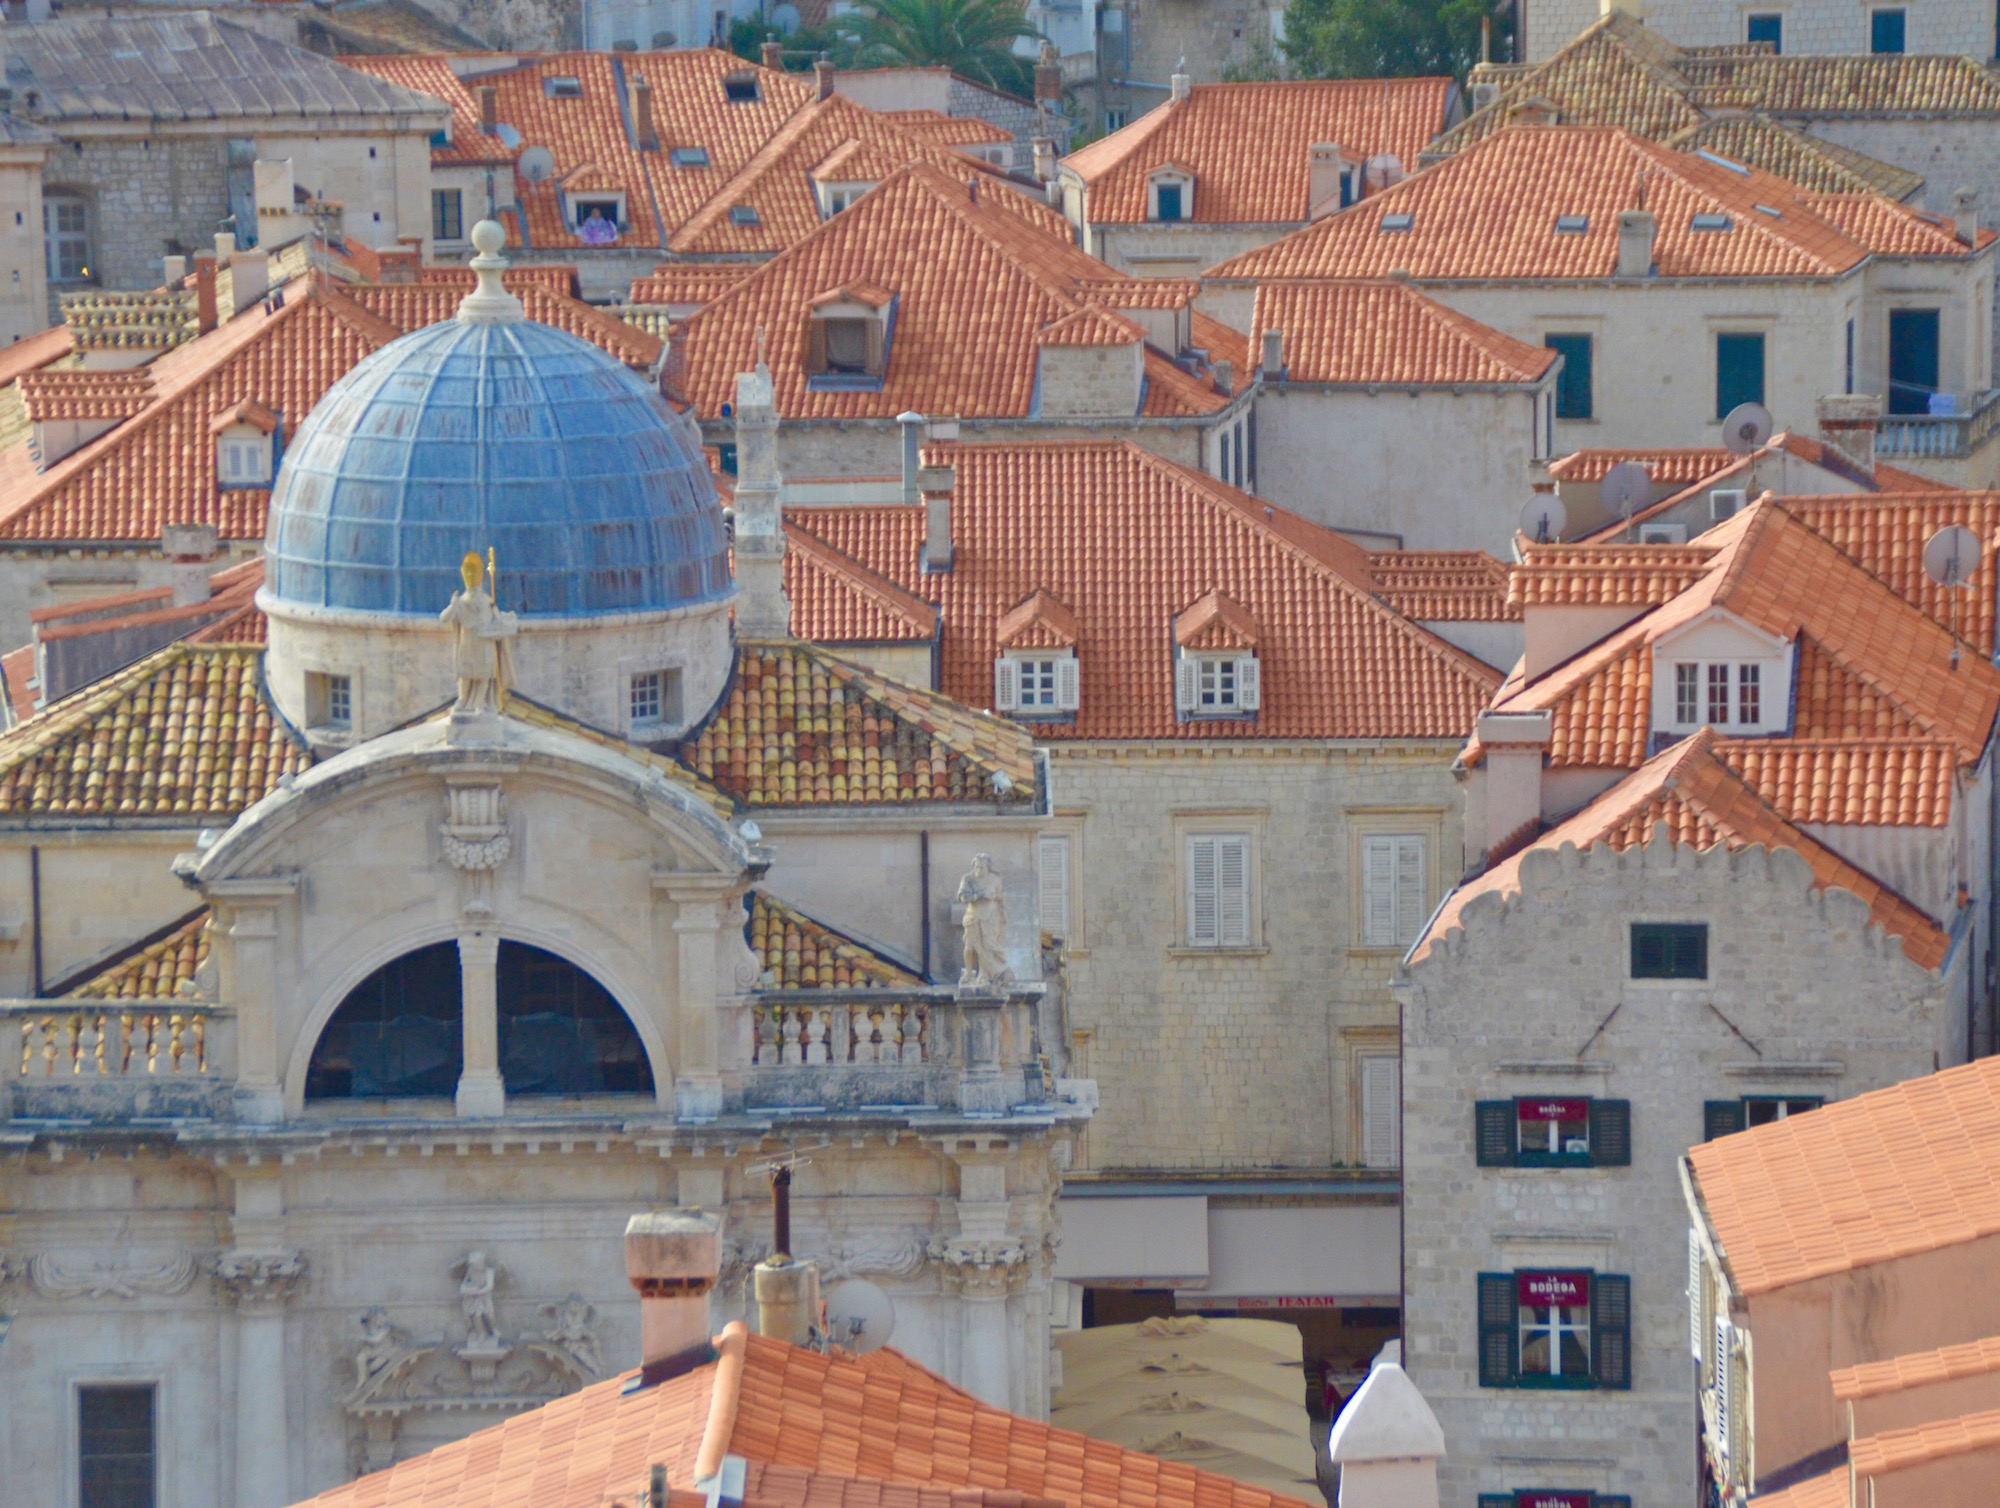 St. Blaise Church from the walls of Dubrovnik